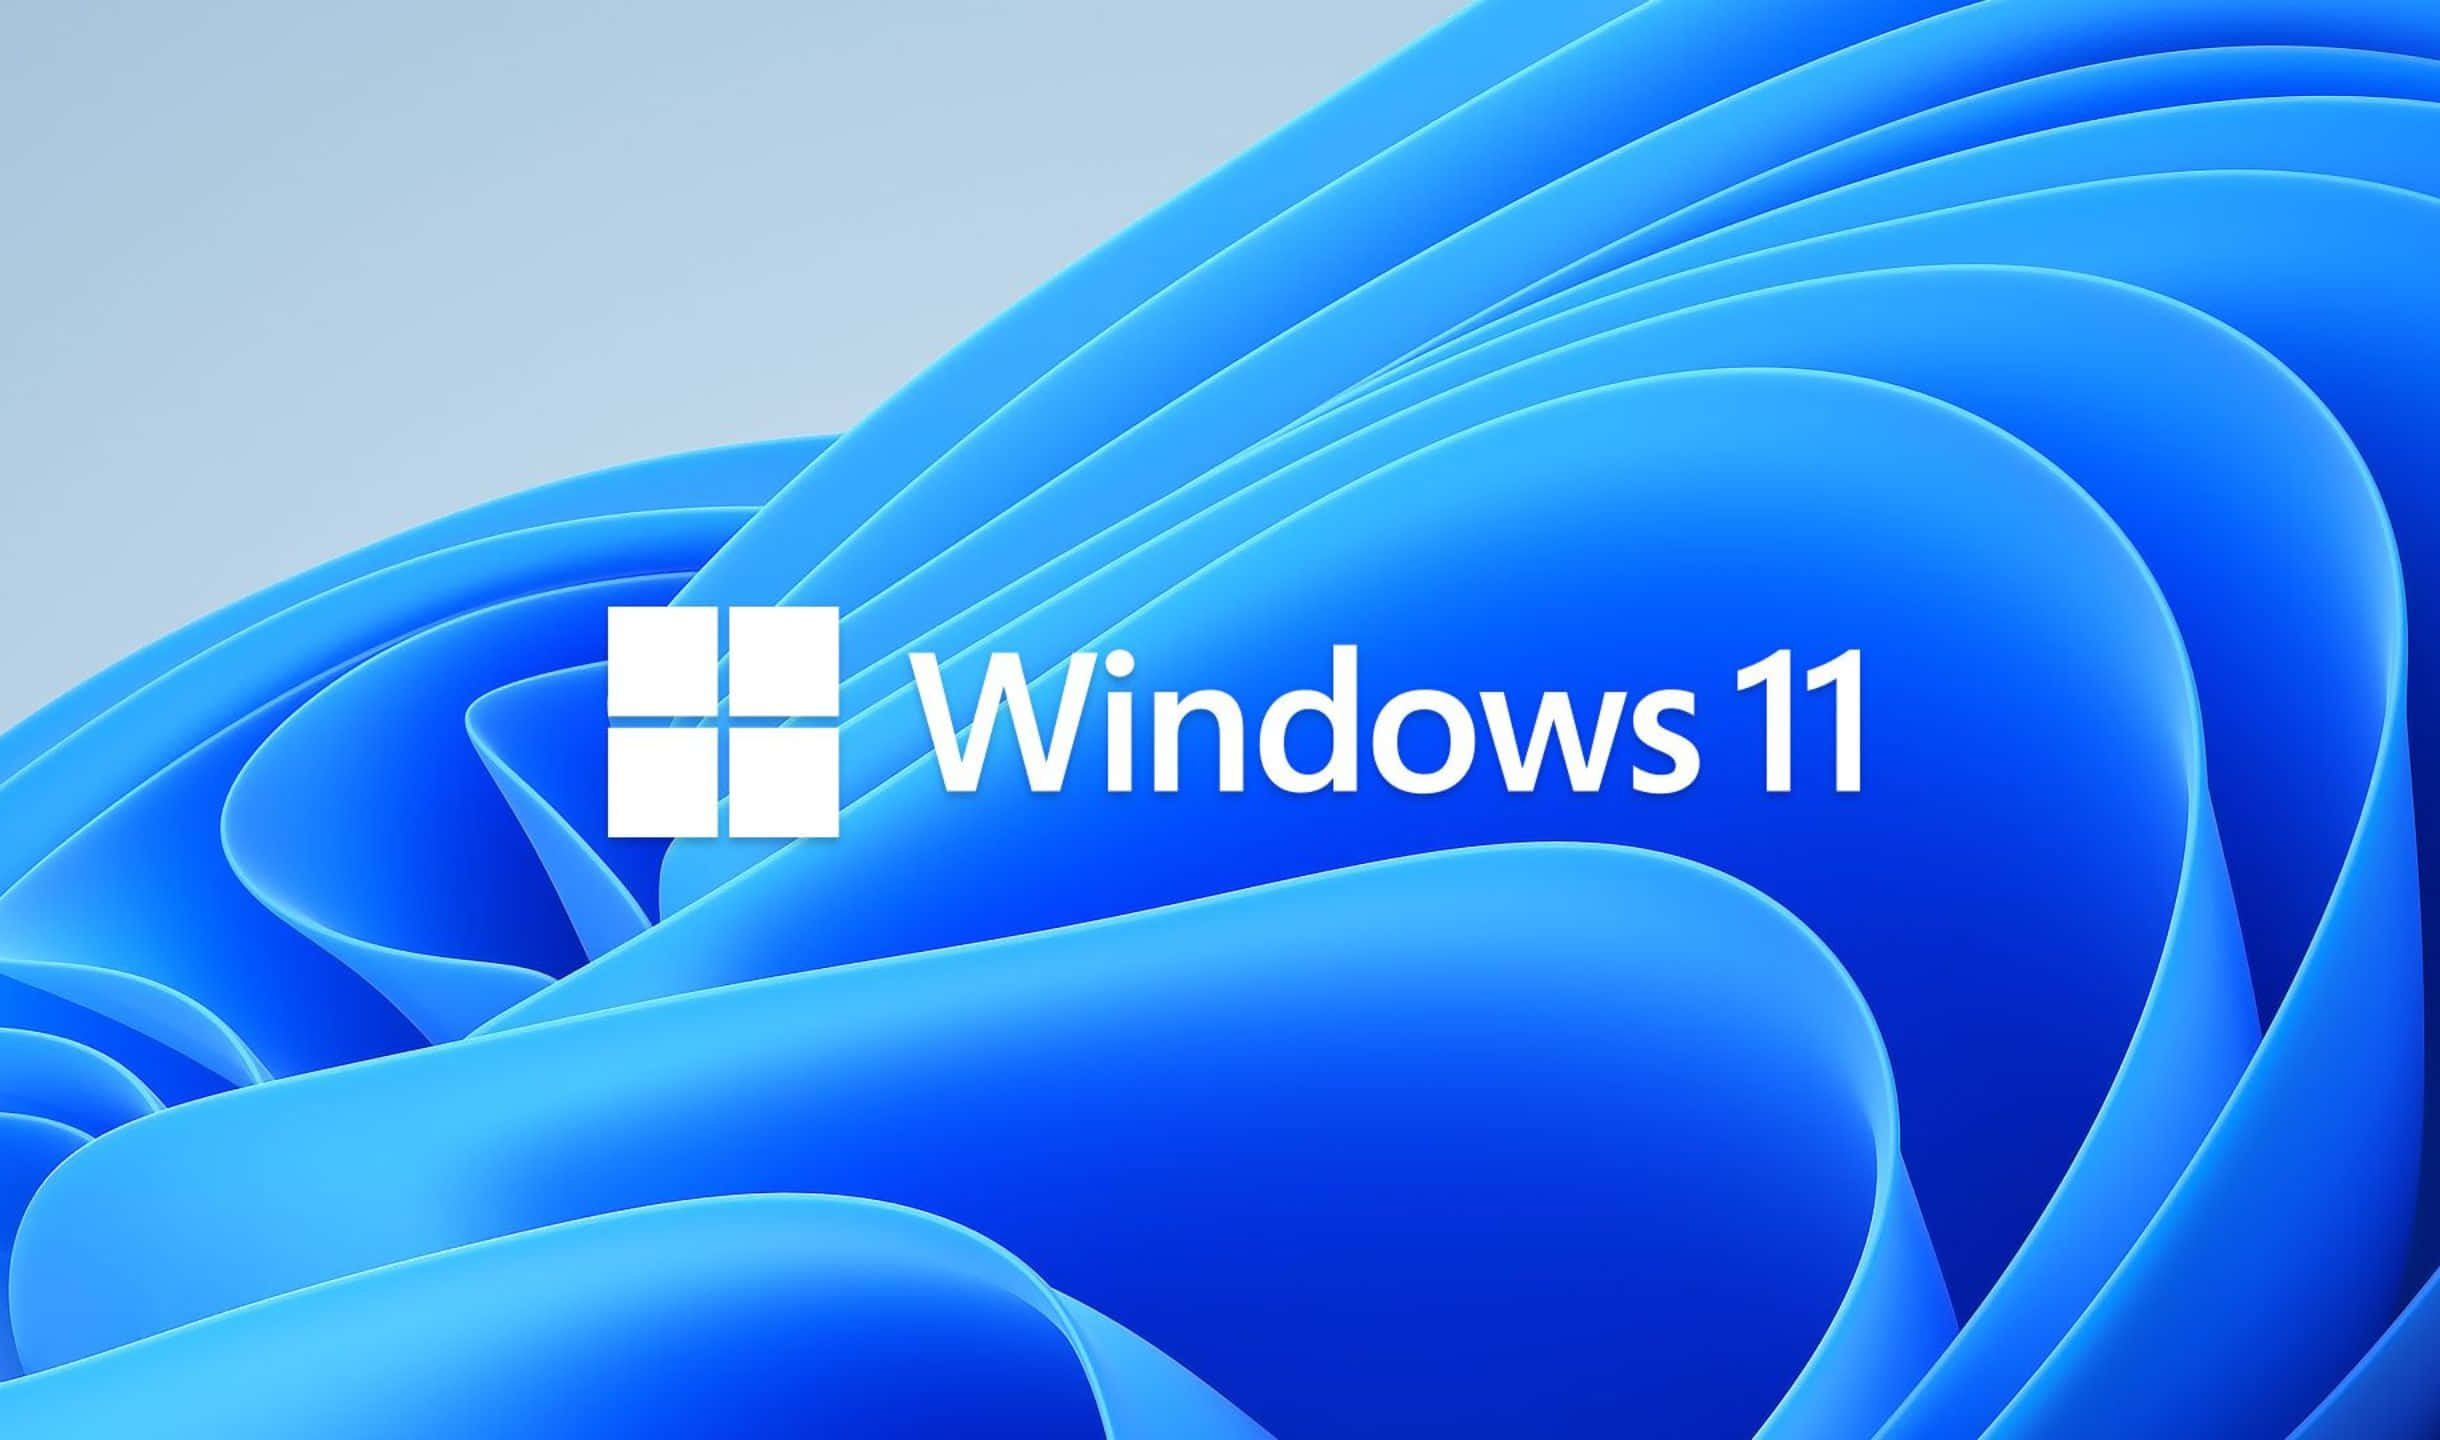 The New Windows 11 Operating System